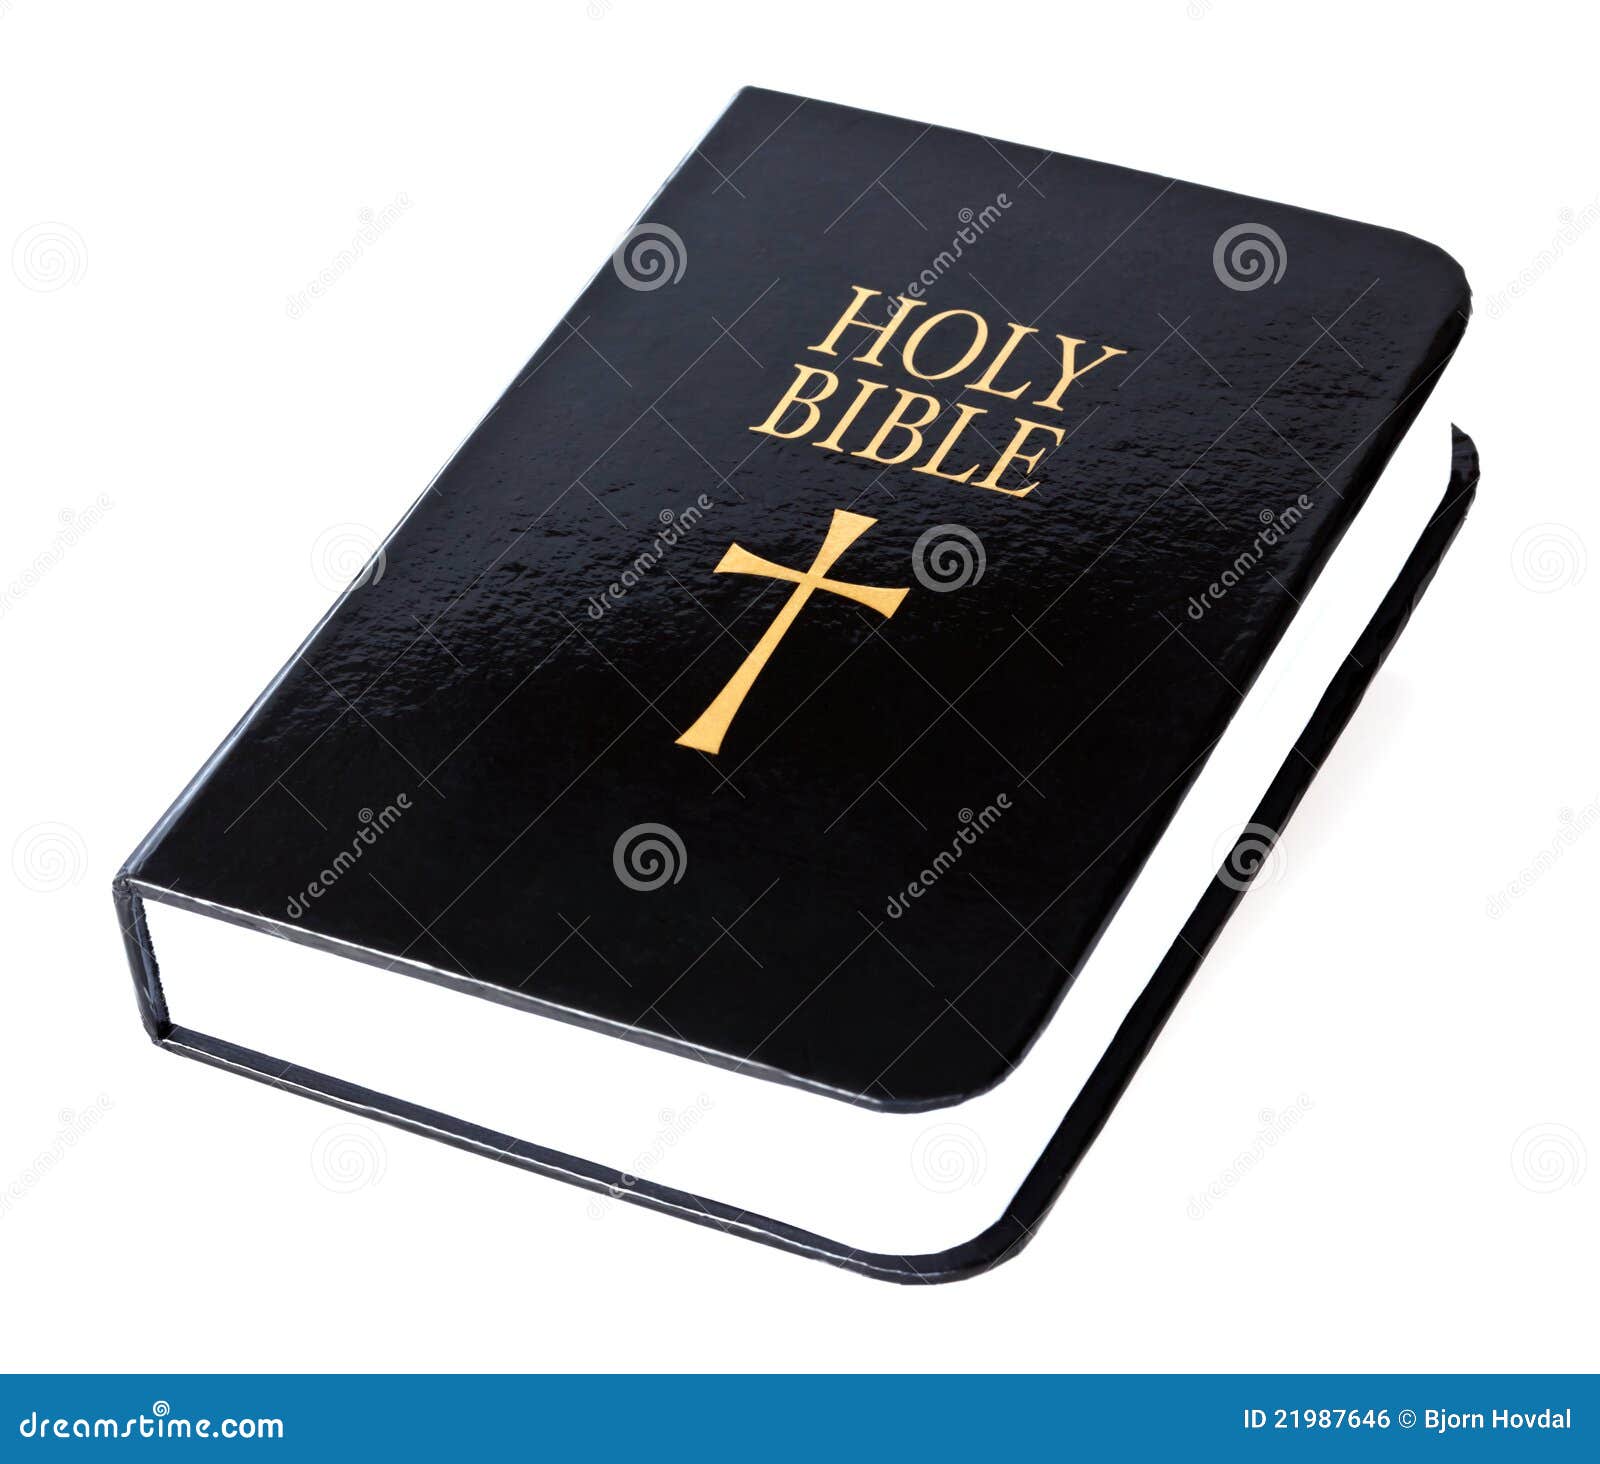 holy bible